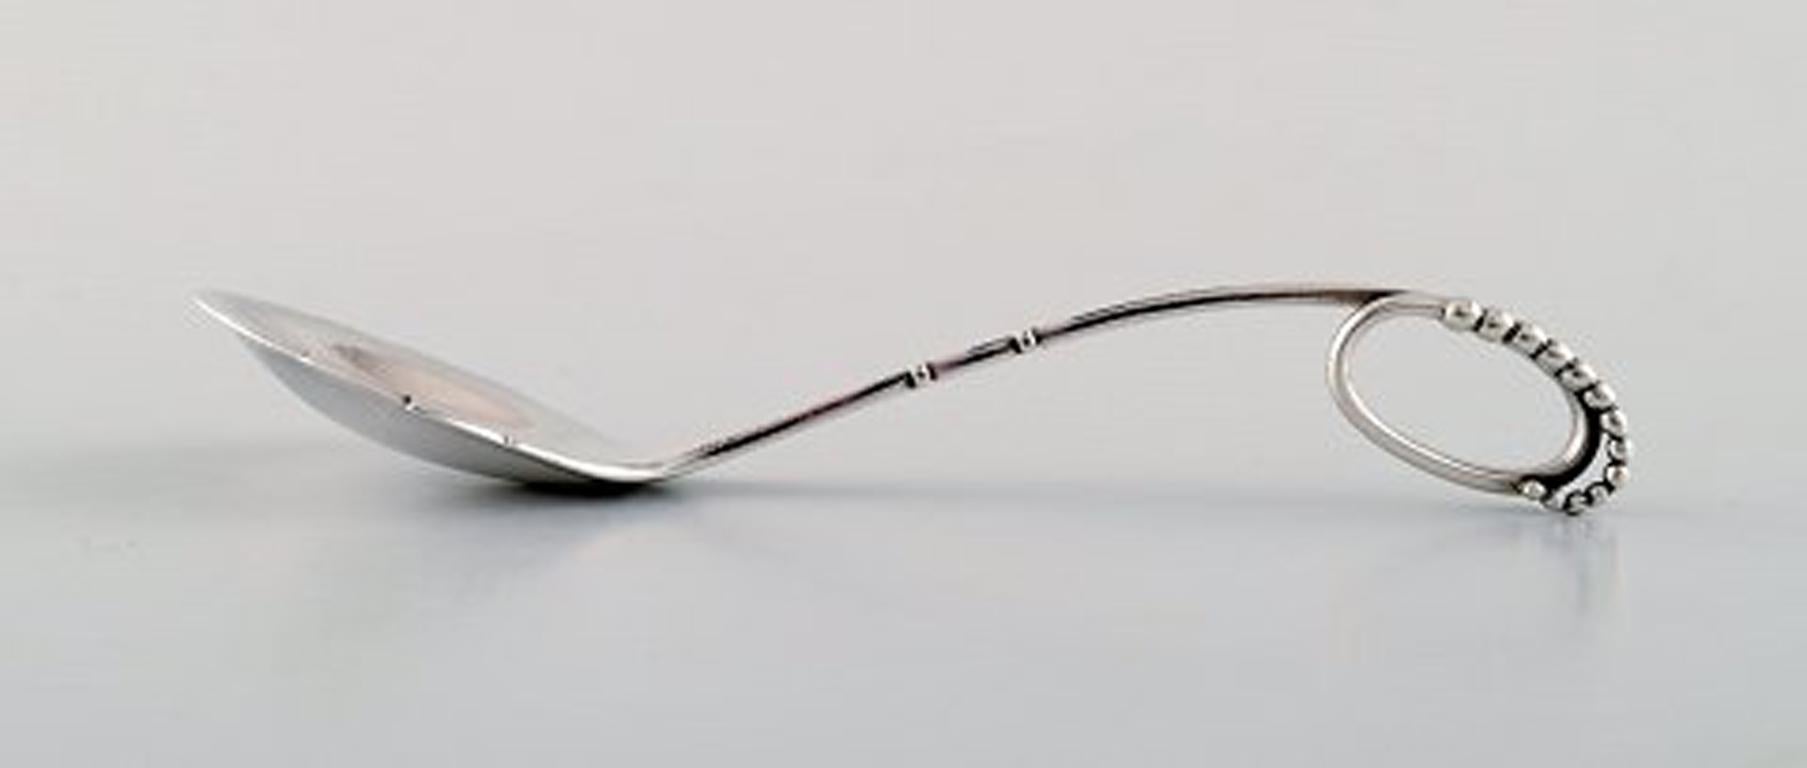 Georg Jensen ornamental sterling silver nr. 41, marmalade spoon.
Length 11.5 cm.
Stamped.
Very good condition.